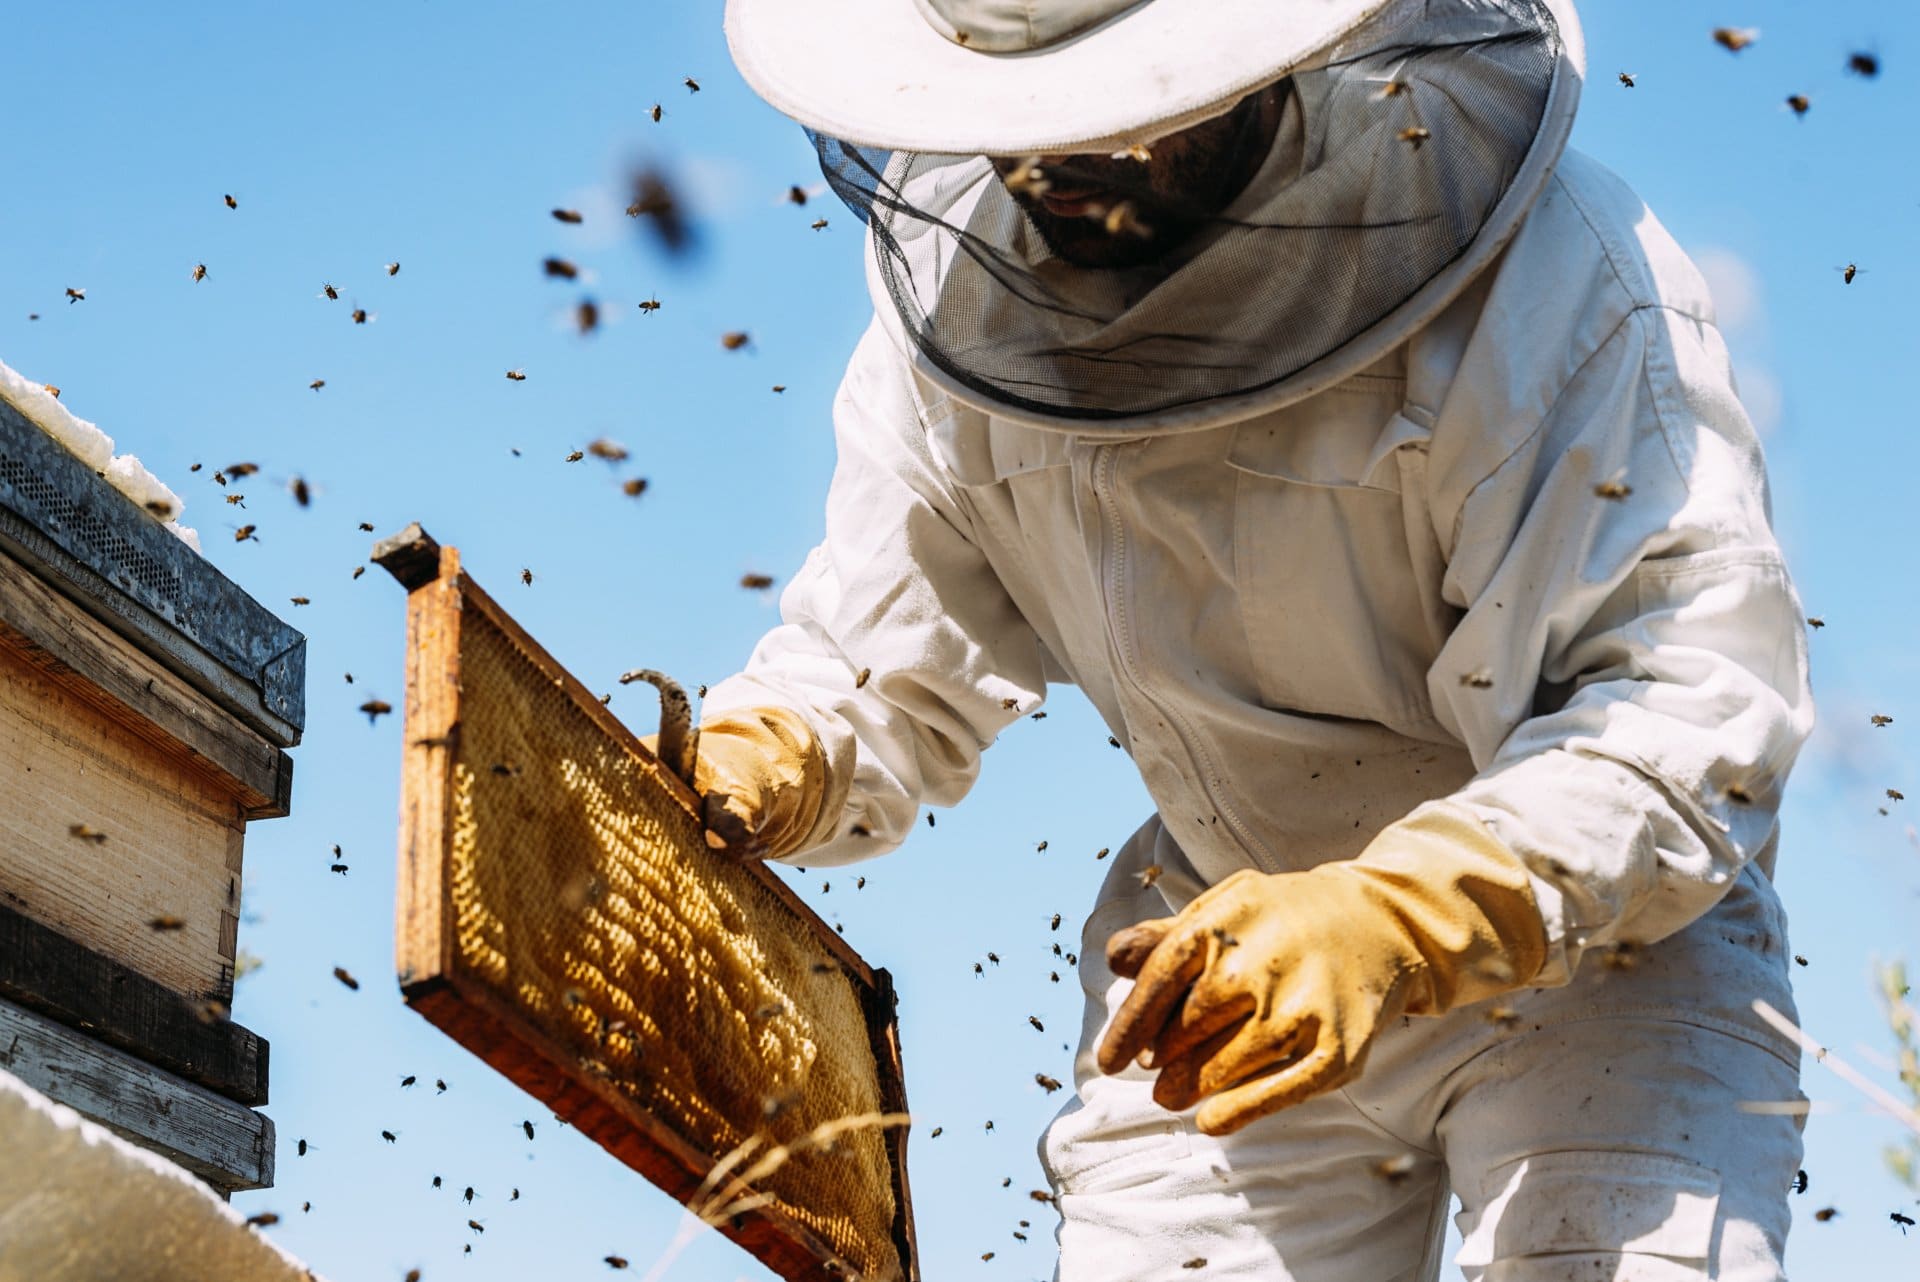 A beekeeper moving a bee colony.